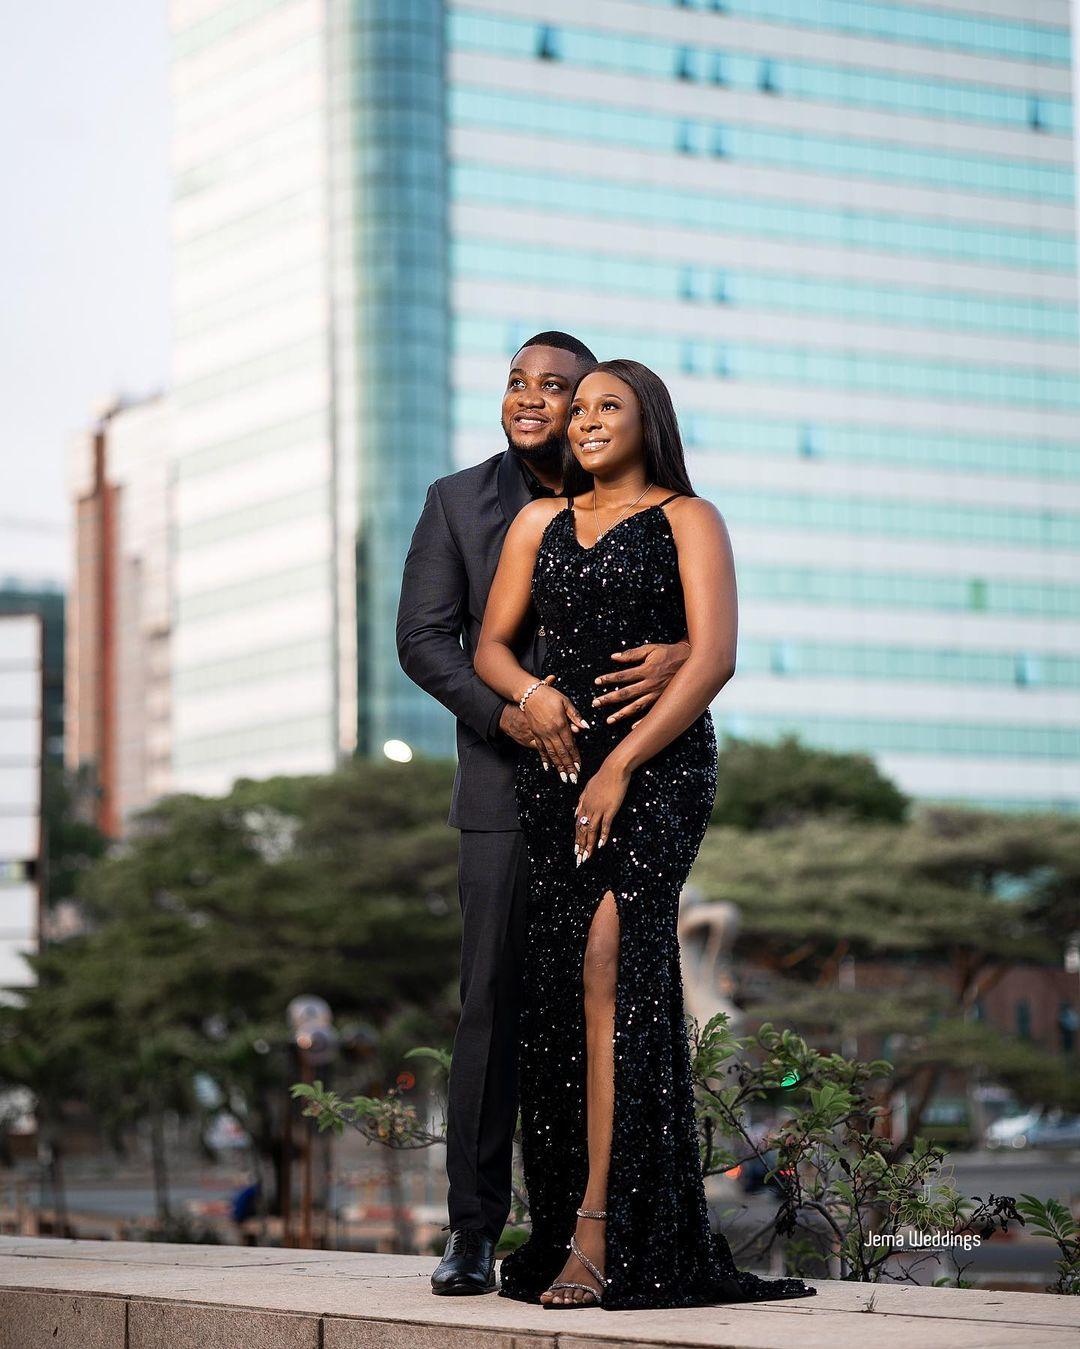 Love is certainly the reason we are here and God is the ultimate factor.

@jema_photography 
@jemaweddings 

#Jo_El21

Groom: @aseye_kwame
Bride: @loved_by_el

Planning: @itz_rammy
Coordination: @justina_nkh
Decor: @jandelltd
Photography: @jema_photography @defaj_photography @praise_gallery
Videography: @defaj_photography
MC: @georgebannerman
DJ: @wuushman01
Bride’s Hair by: @sooo_lush @revupsalon
Bride’s Hair fixing &amp; styling: @strandsnmirrors @manedimensions_gh
Bride’s Make up: @finessebymaanaa
Bride’s Pre wedding make up: @lumierebeauty.gh
Bride’s Kente: @kwadatkente_
Bride’s traditional wear: @saadiasanusi
Bride’s traditional changeover: @___demay
Bridal fan: @vestir_gh
Bouquets and Boutonnières: @jandelltd
Bridal accessories: @littlethings_gh @yebs_accessoriesnmore
rotocolservices
Waiting &amp; ushering services: @danarford